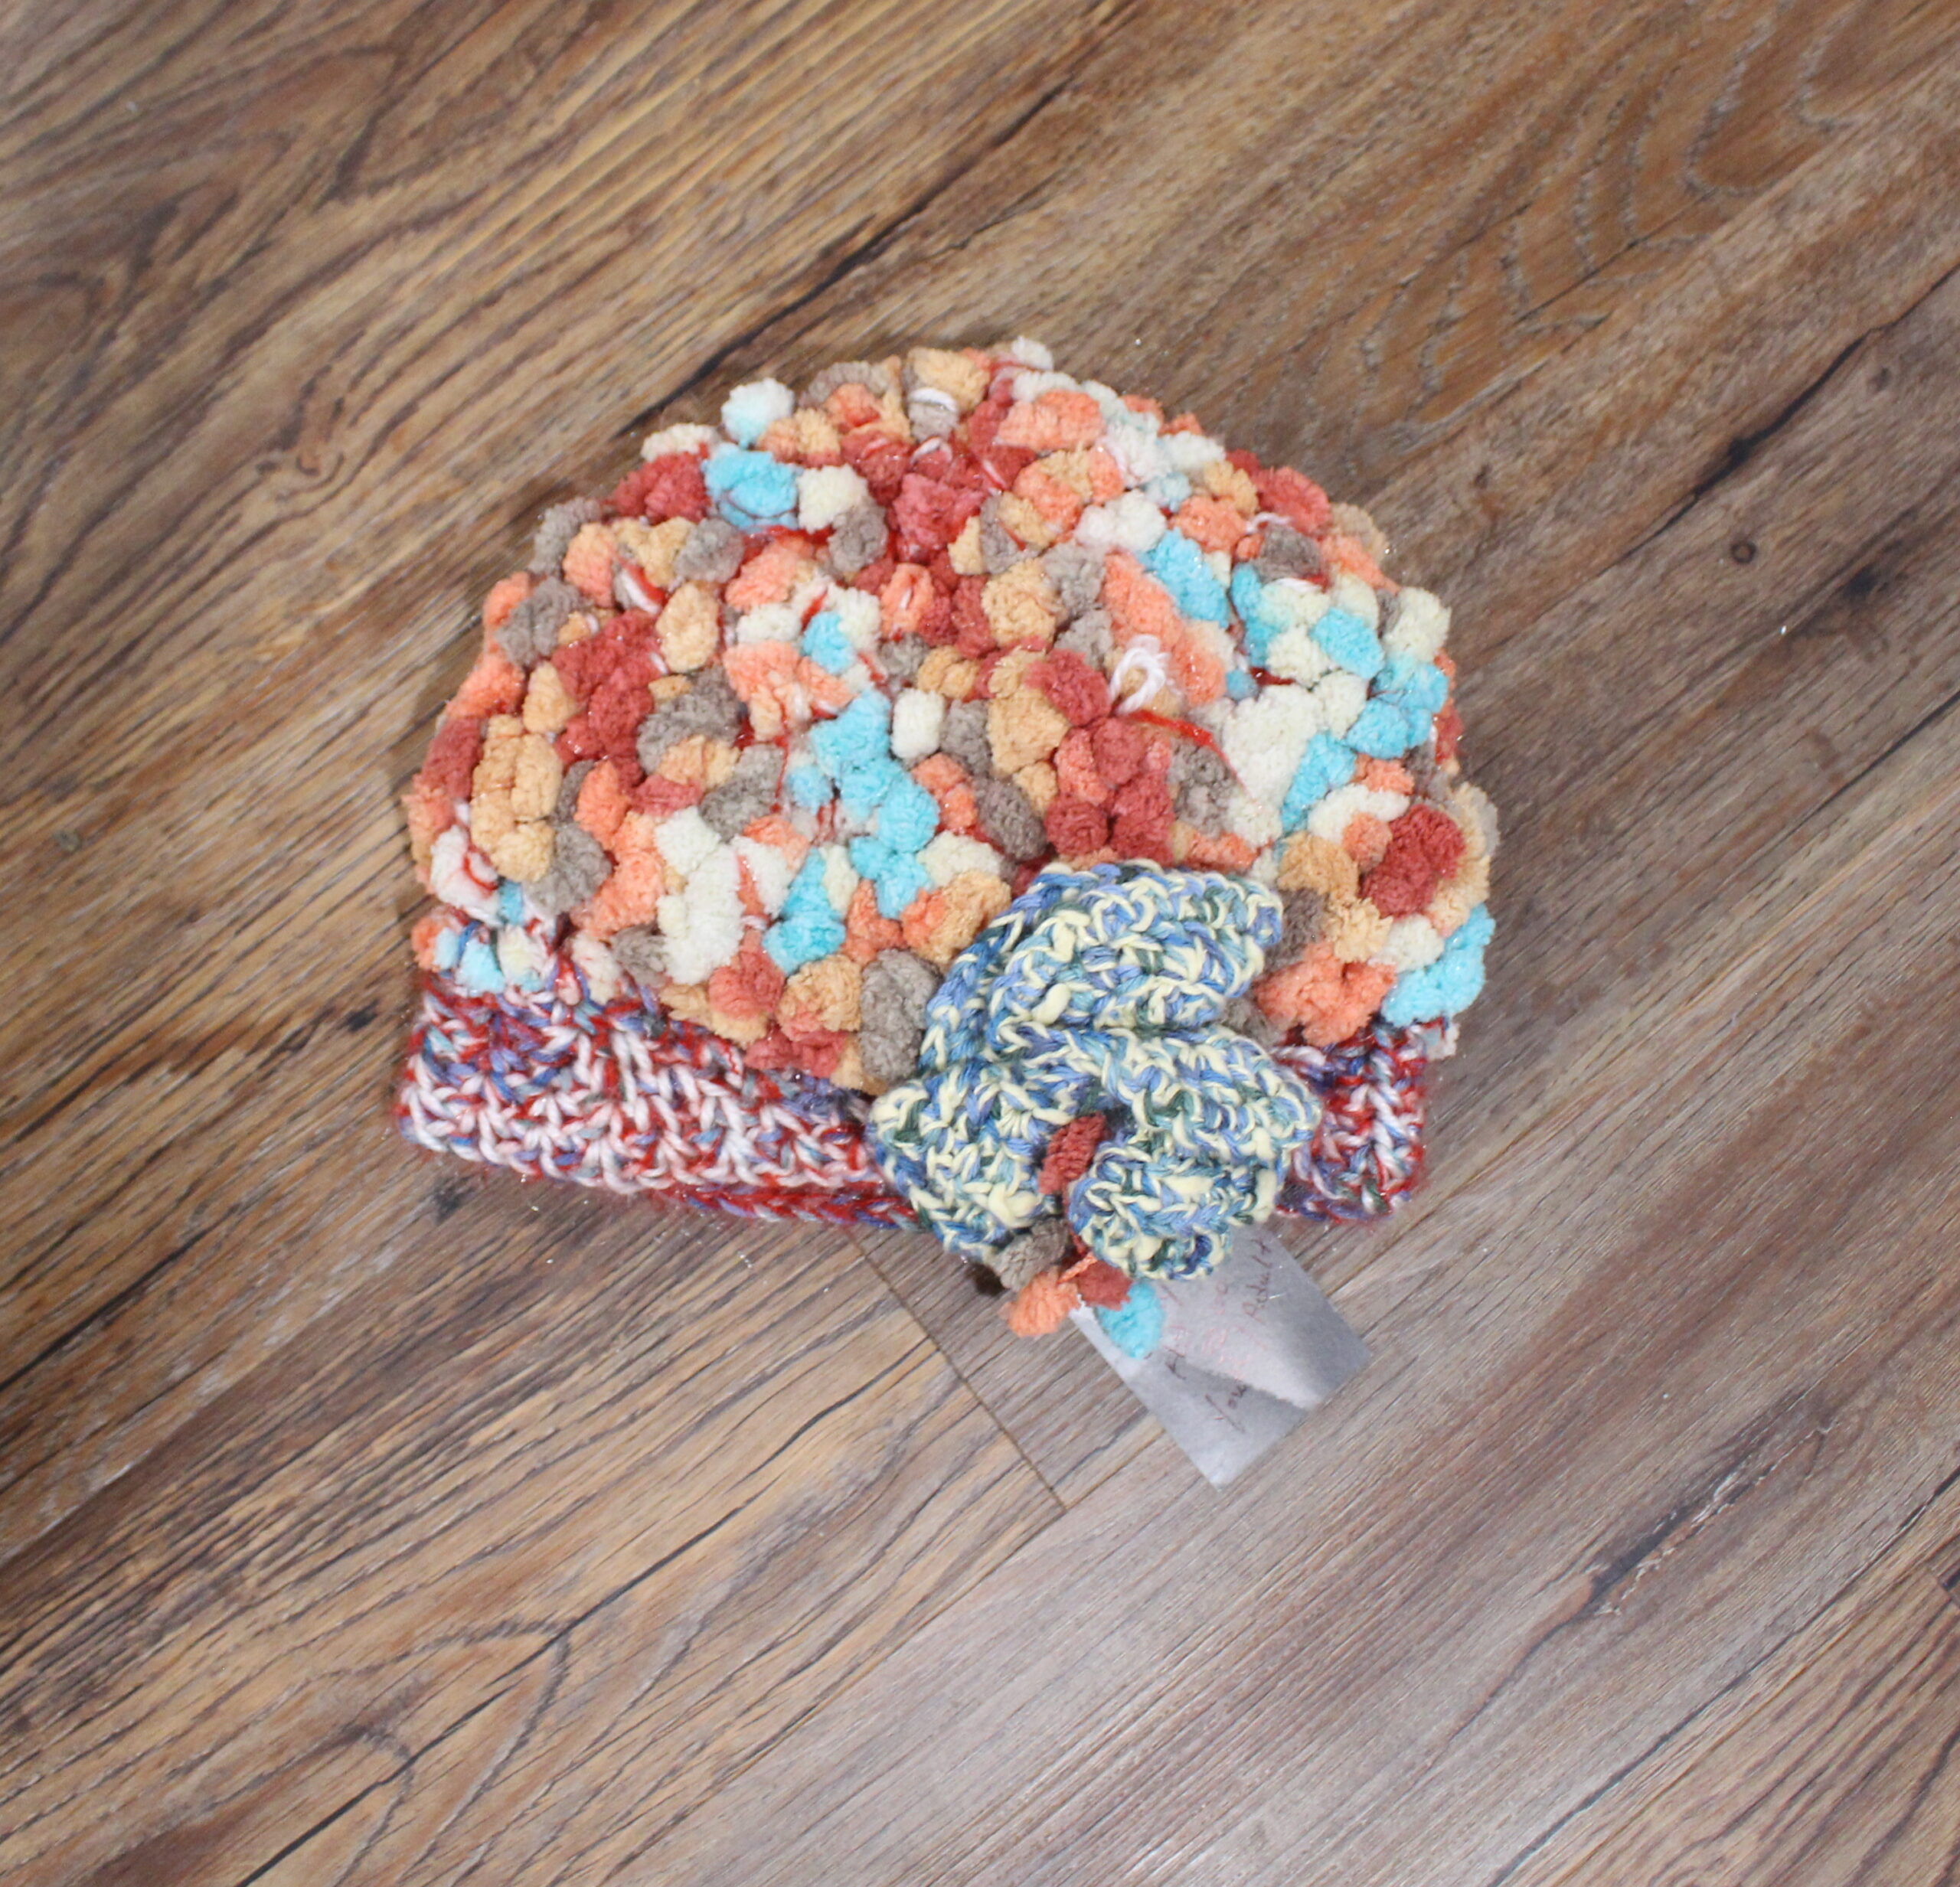 A colorful pom pom hat on a wooden floor.